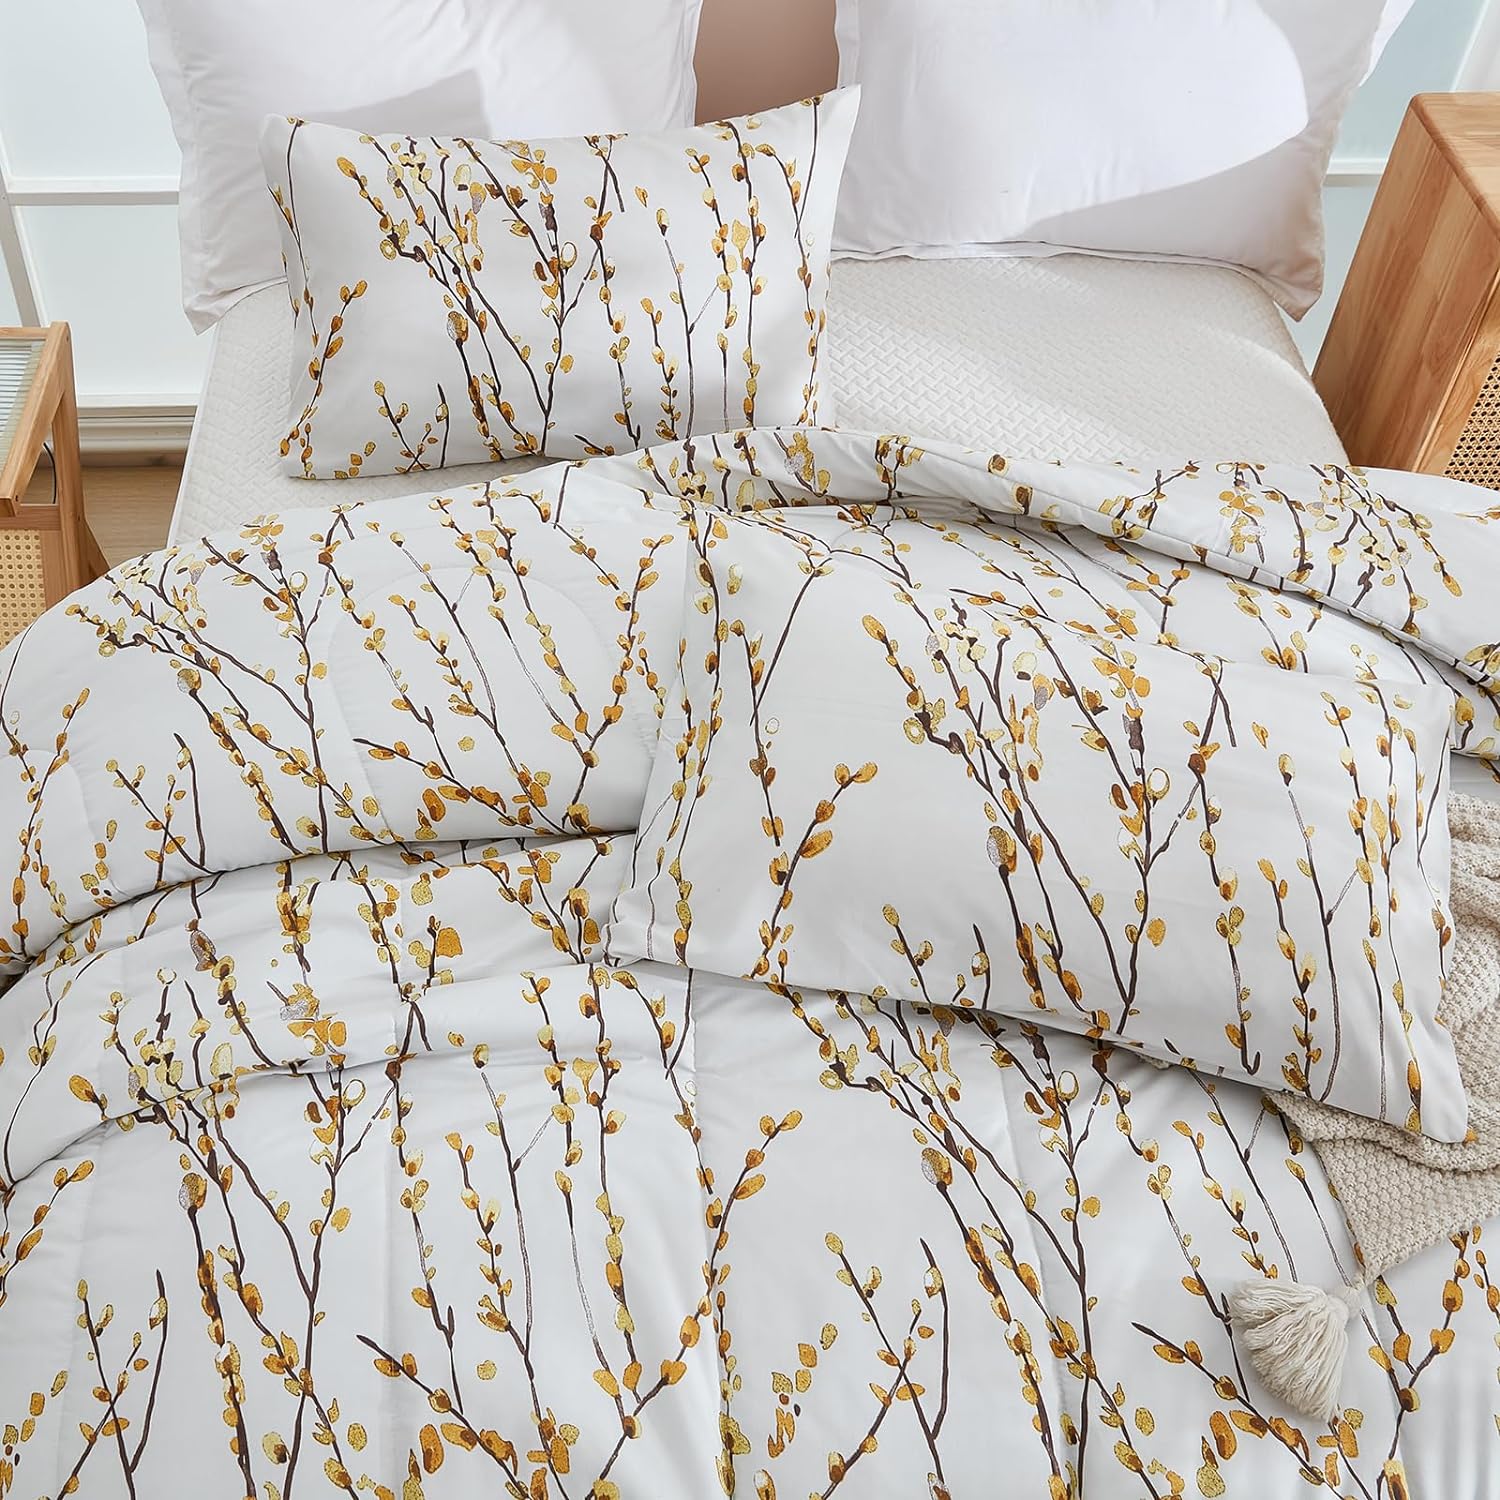 Bedbay Yellow Floral Comforter Queen Size Bedding Set Branches Leaf Botanical Plant Themed Soft Microfiber Fluffy Comforter 3 Pieces Room Decor Aesthetic Bedding for Girls Boys Adults